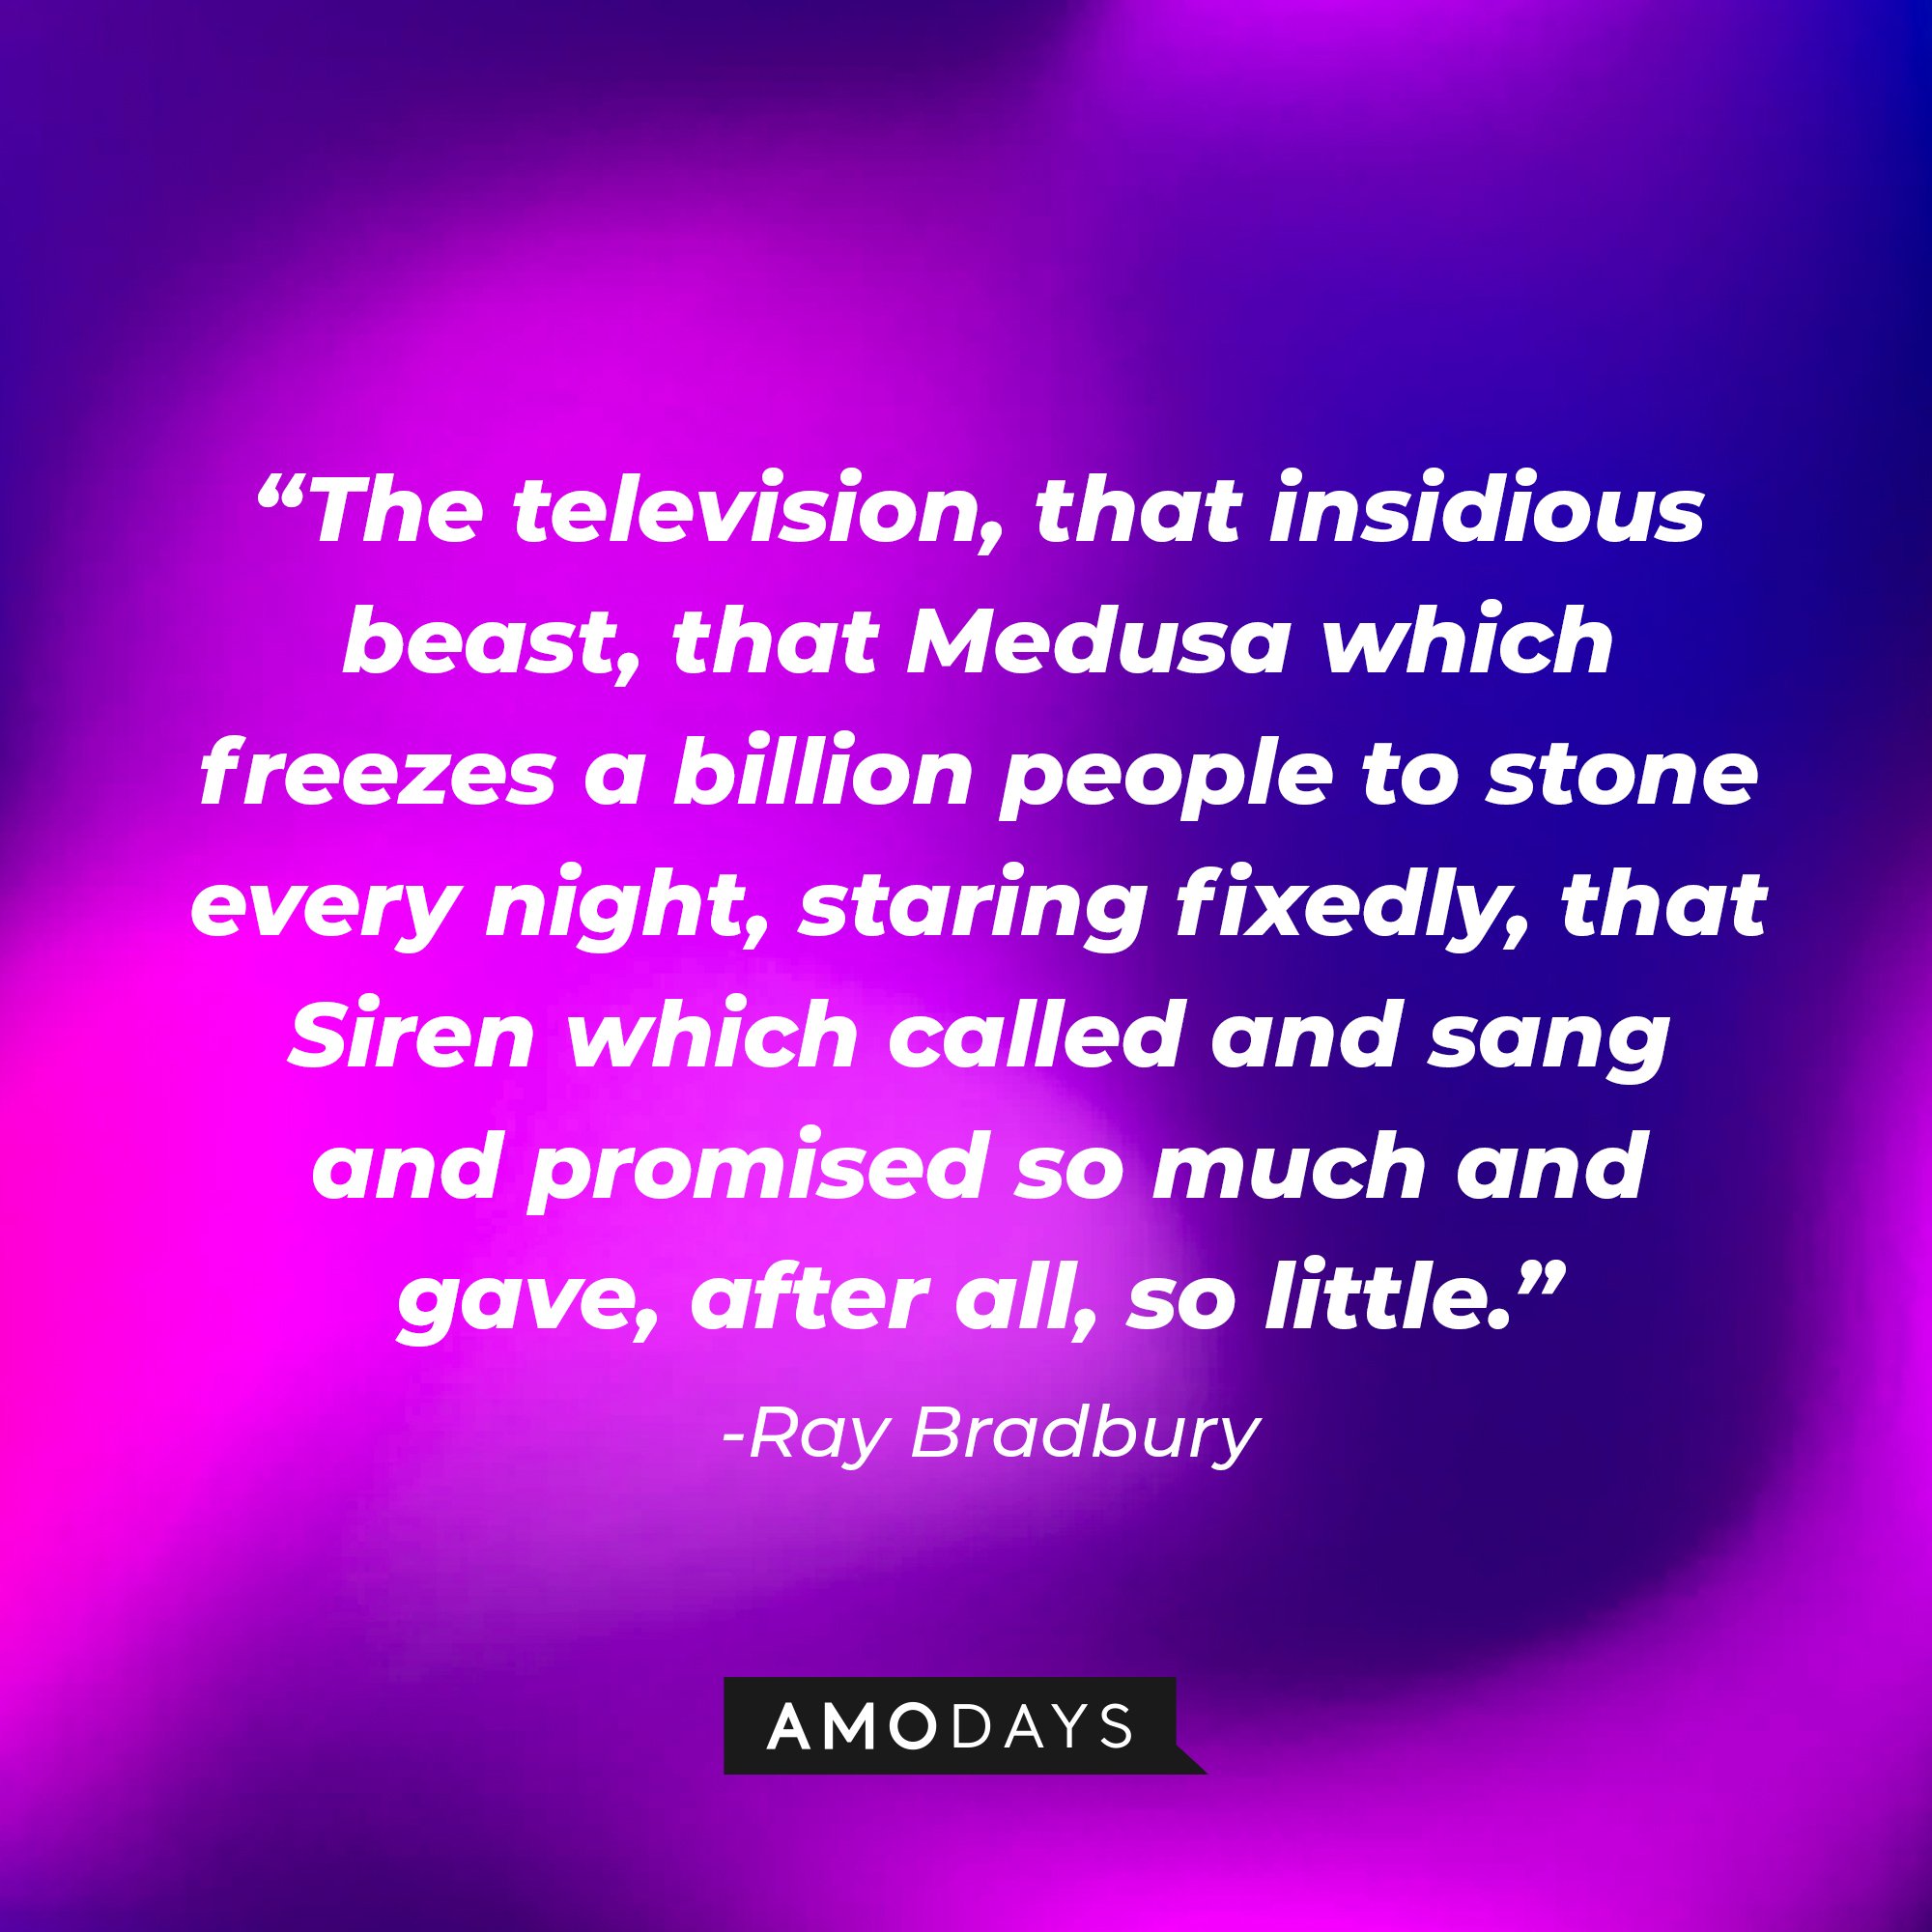 Ray Bradbury’s quote: “The television, that insidious beast, that Medusa which freezes a billion people to stone every night, staring fixedly, that Siren which called and sang and promised so much and gave, after all, so little.” | Image: AmoDays